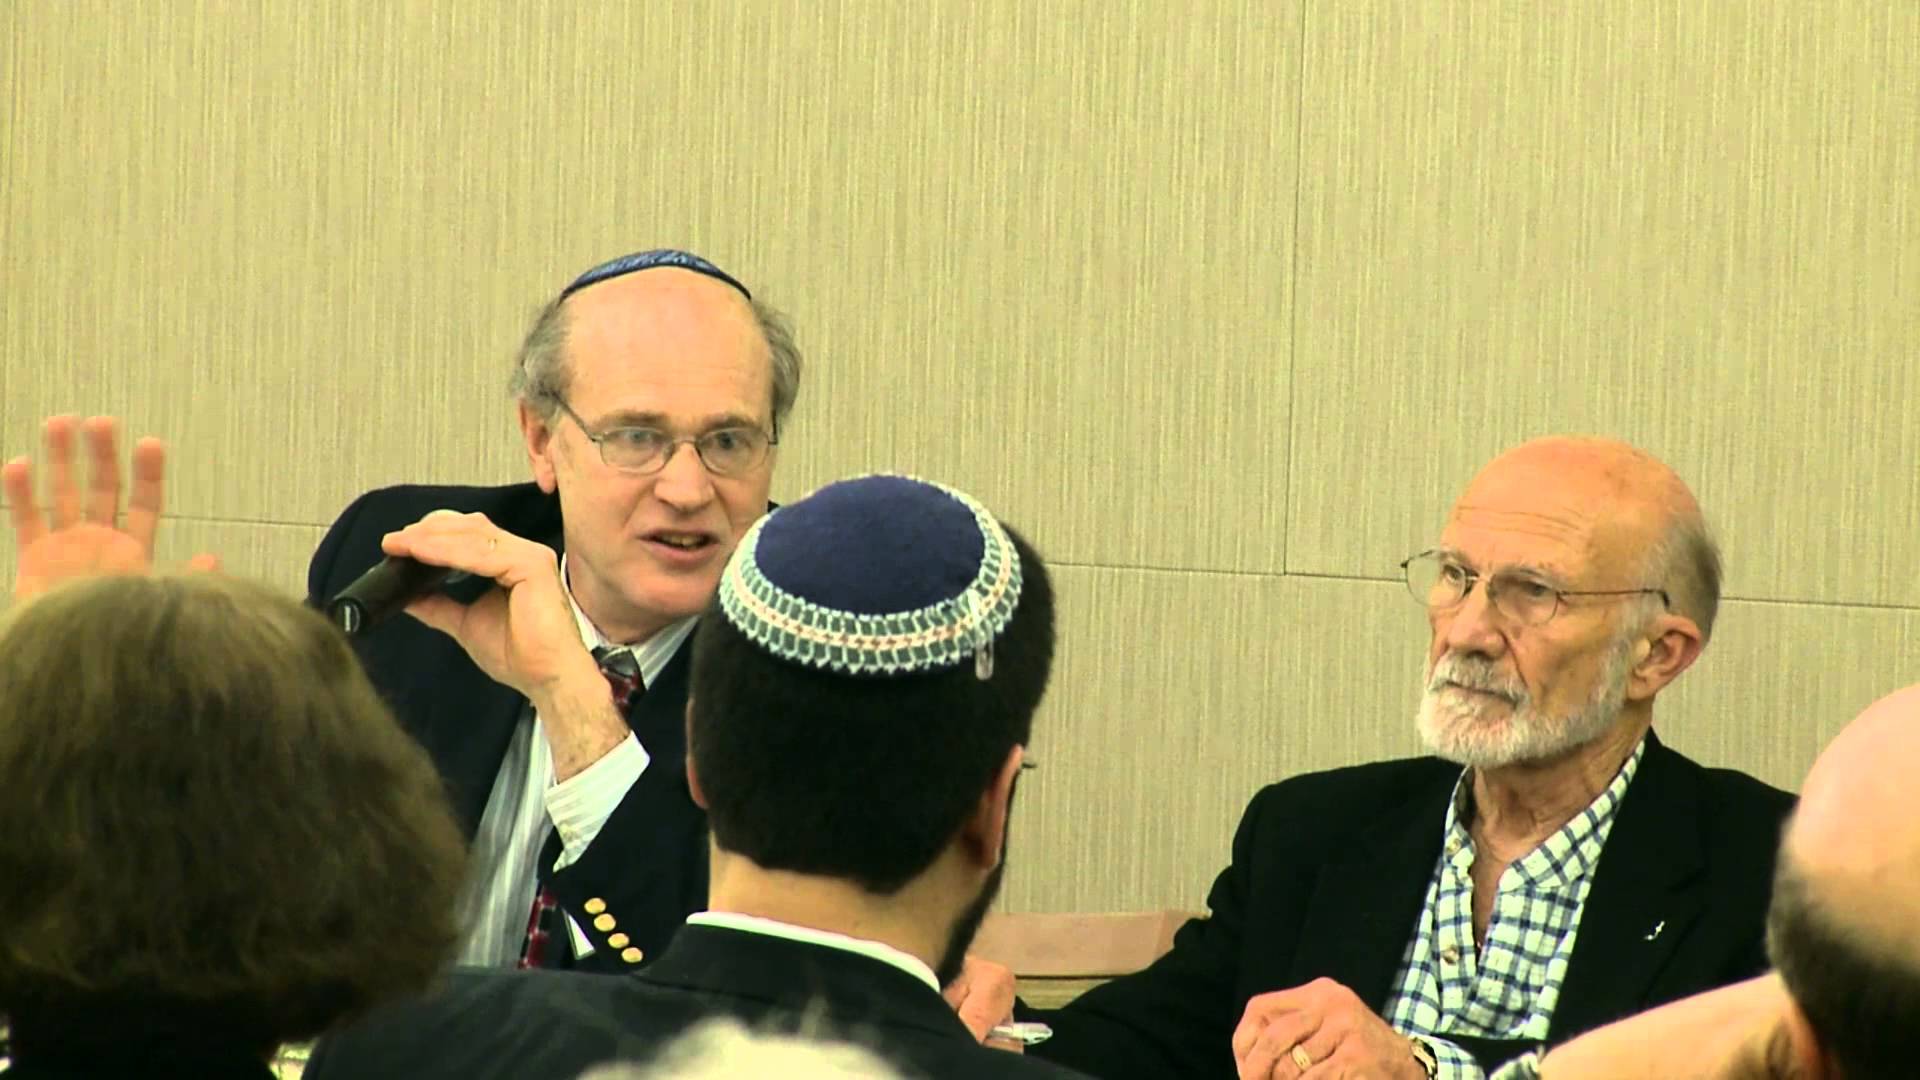 The Future of Jewish Christian Dialogue | Panel Discussion